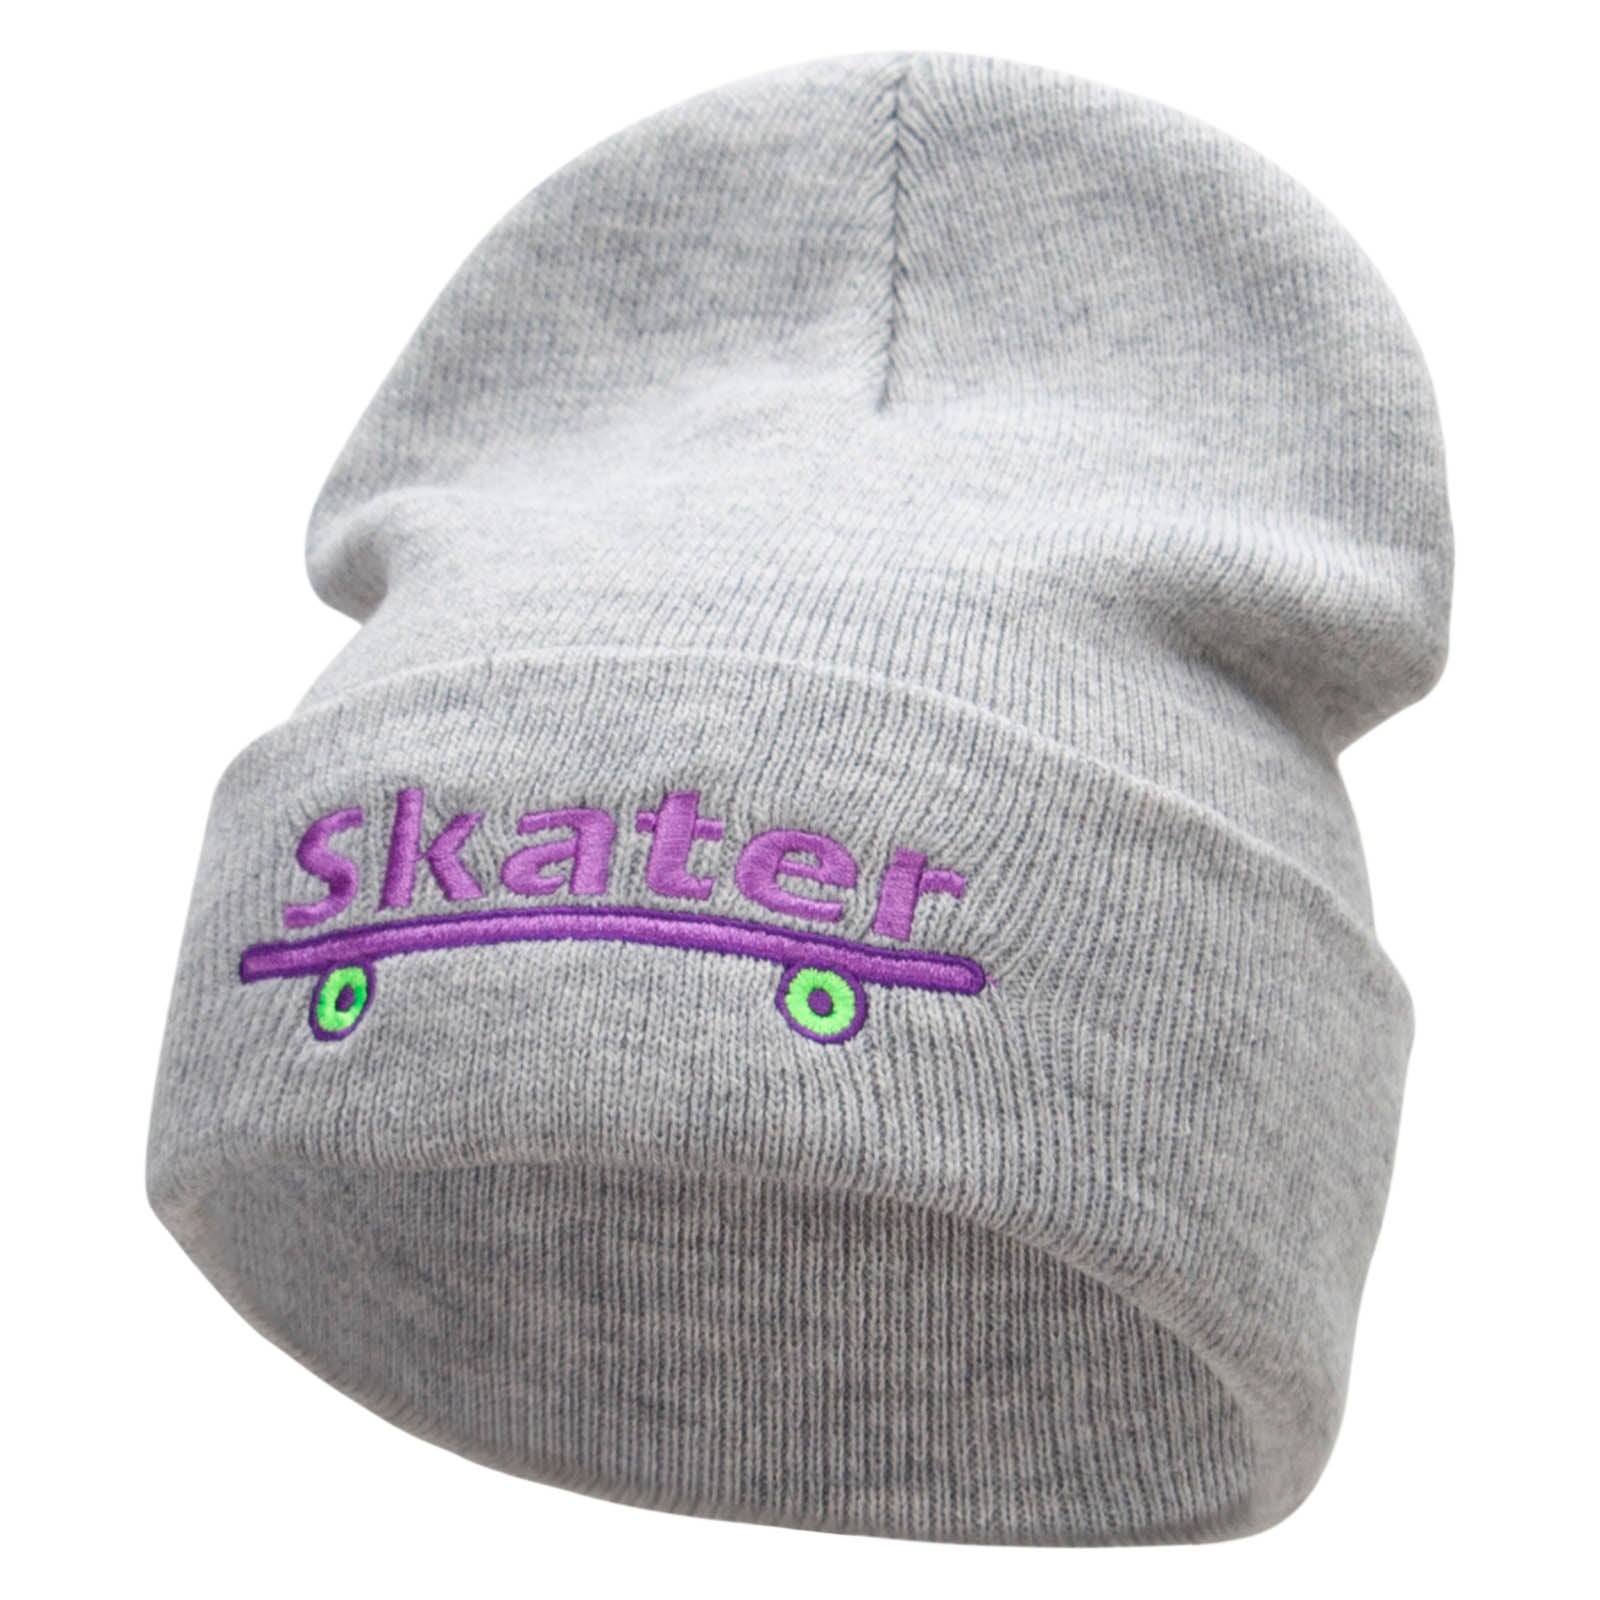 Skater Embroidered 12 Inch Long Knitted Beanie - Heather Grey OSFM